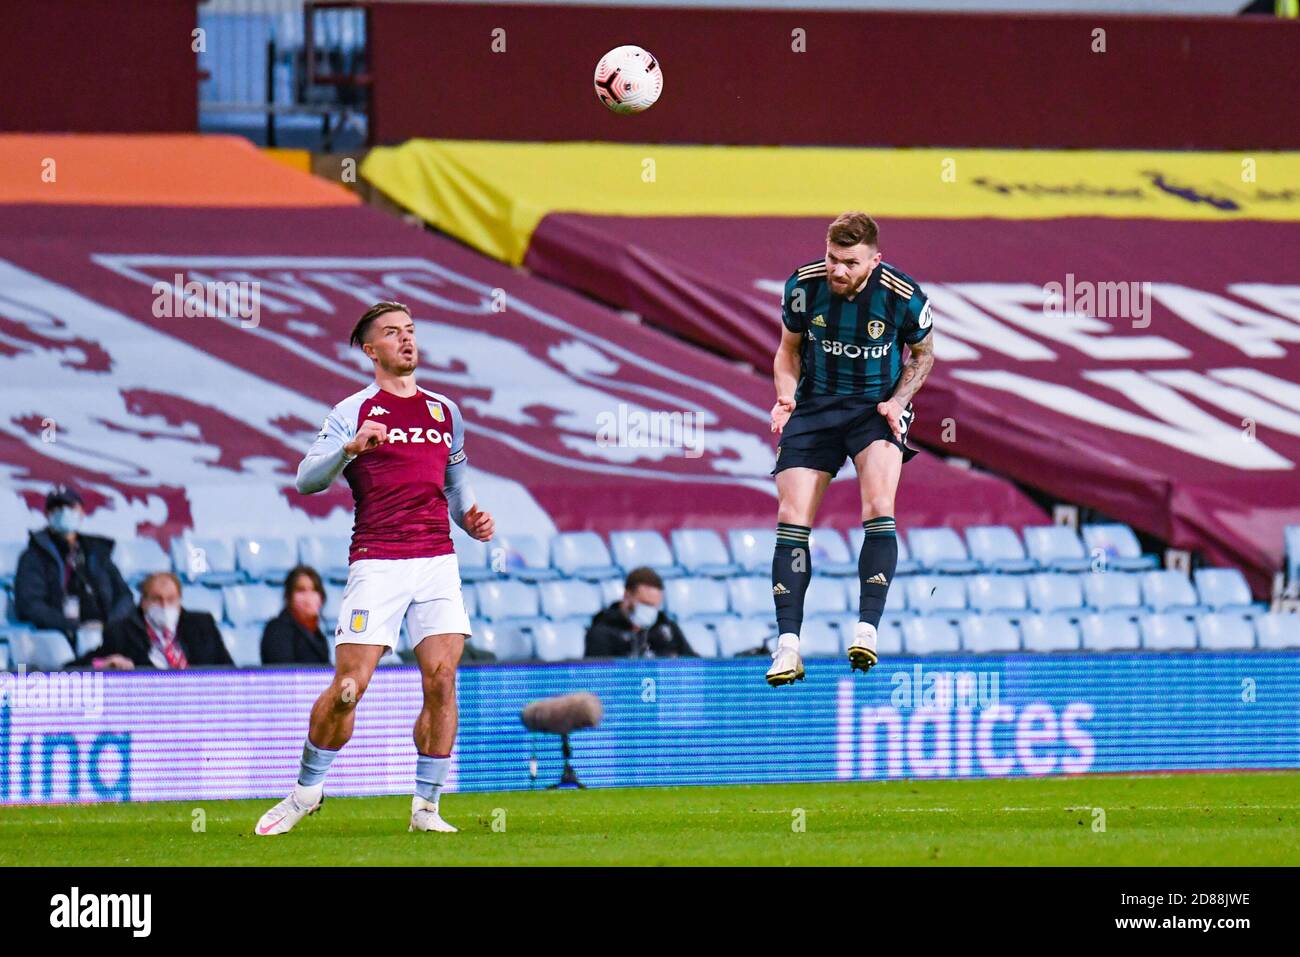 Leeds United defender Stuart Dallas (15) headers the ball during the English championship Premier League football match between Aston Villa and Leed C Stock Photo